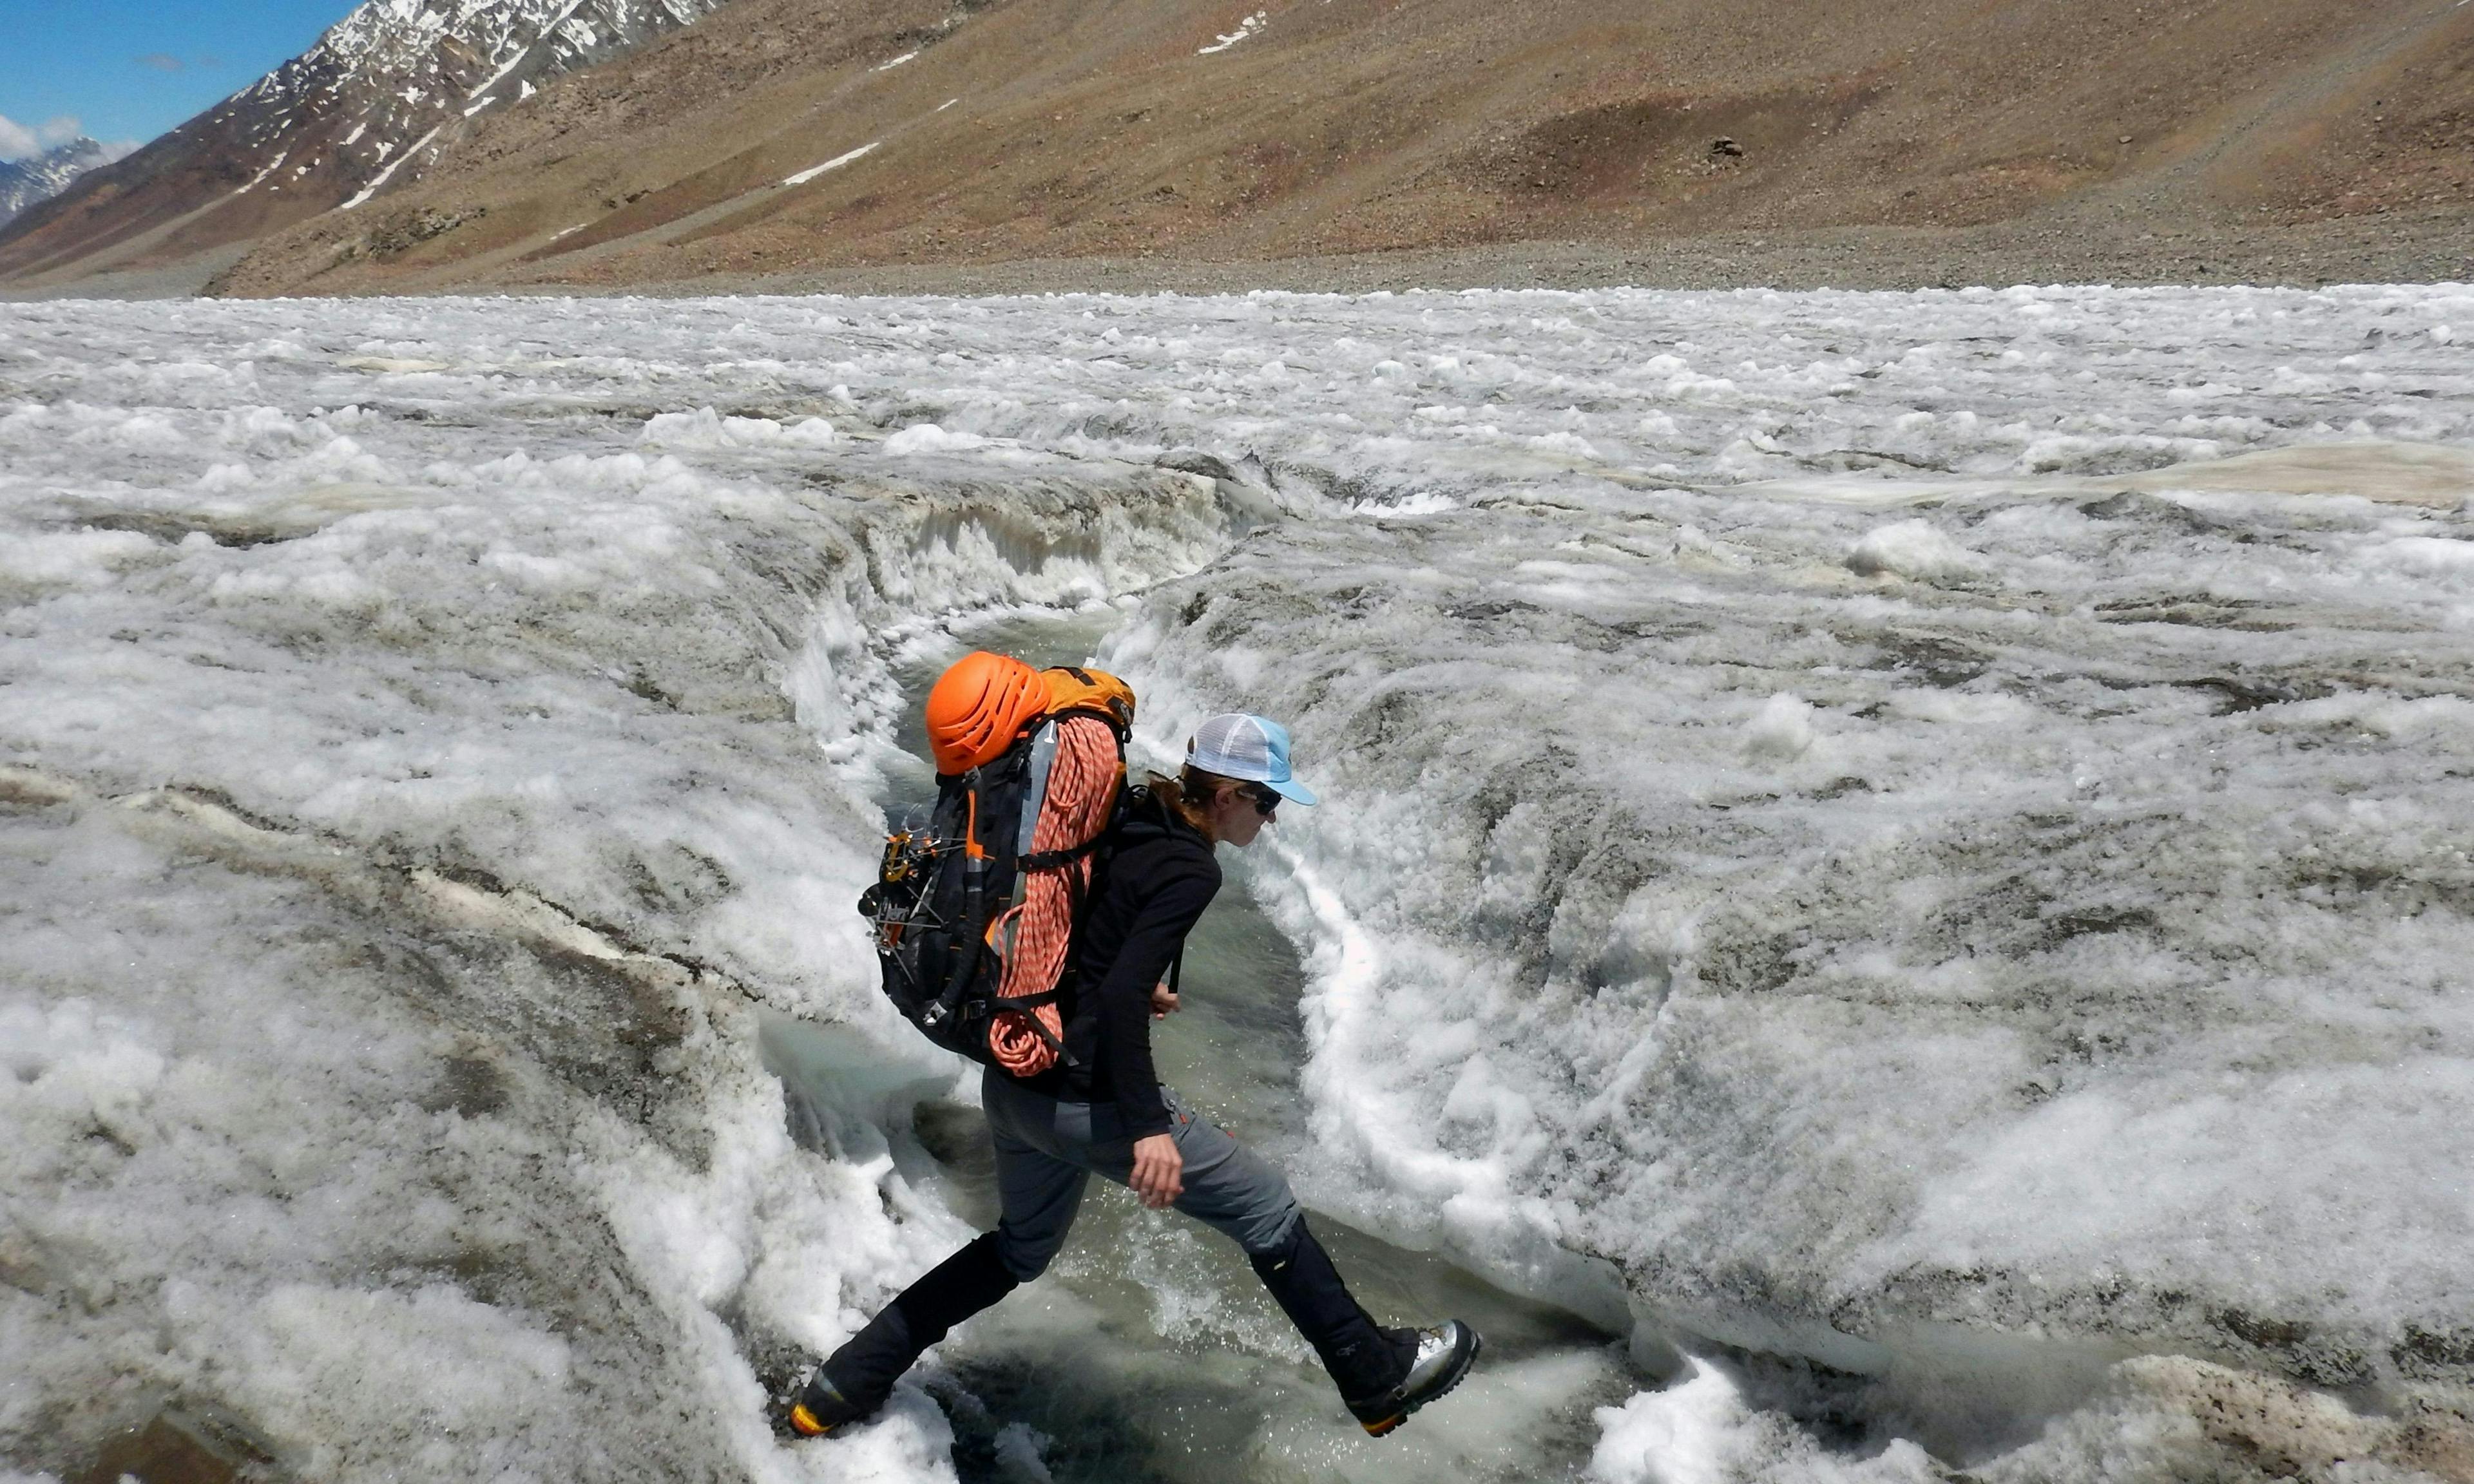 A person wearing a backpack and mountaineering gear hops over a crevasse on a glacier.